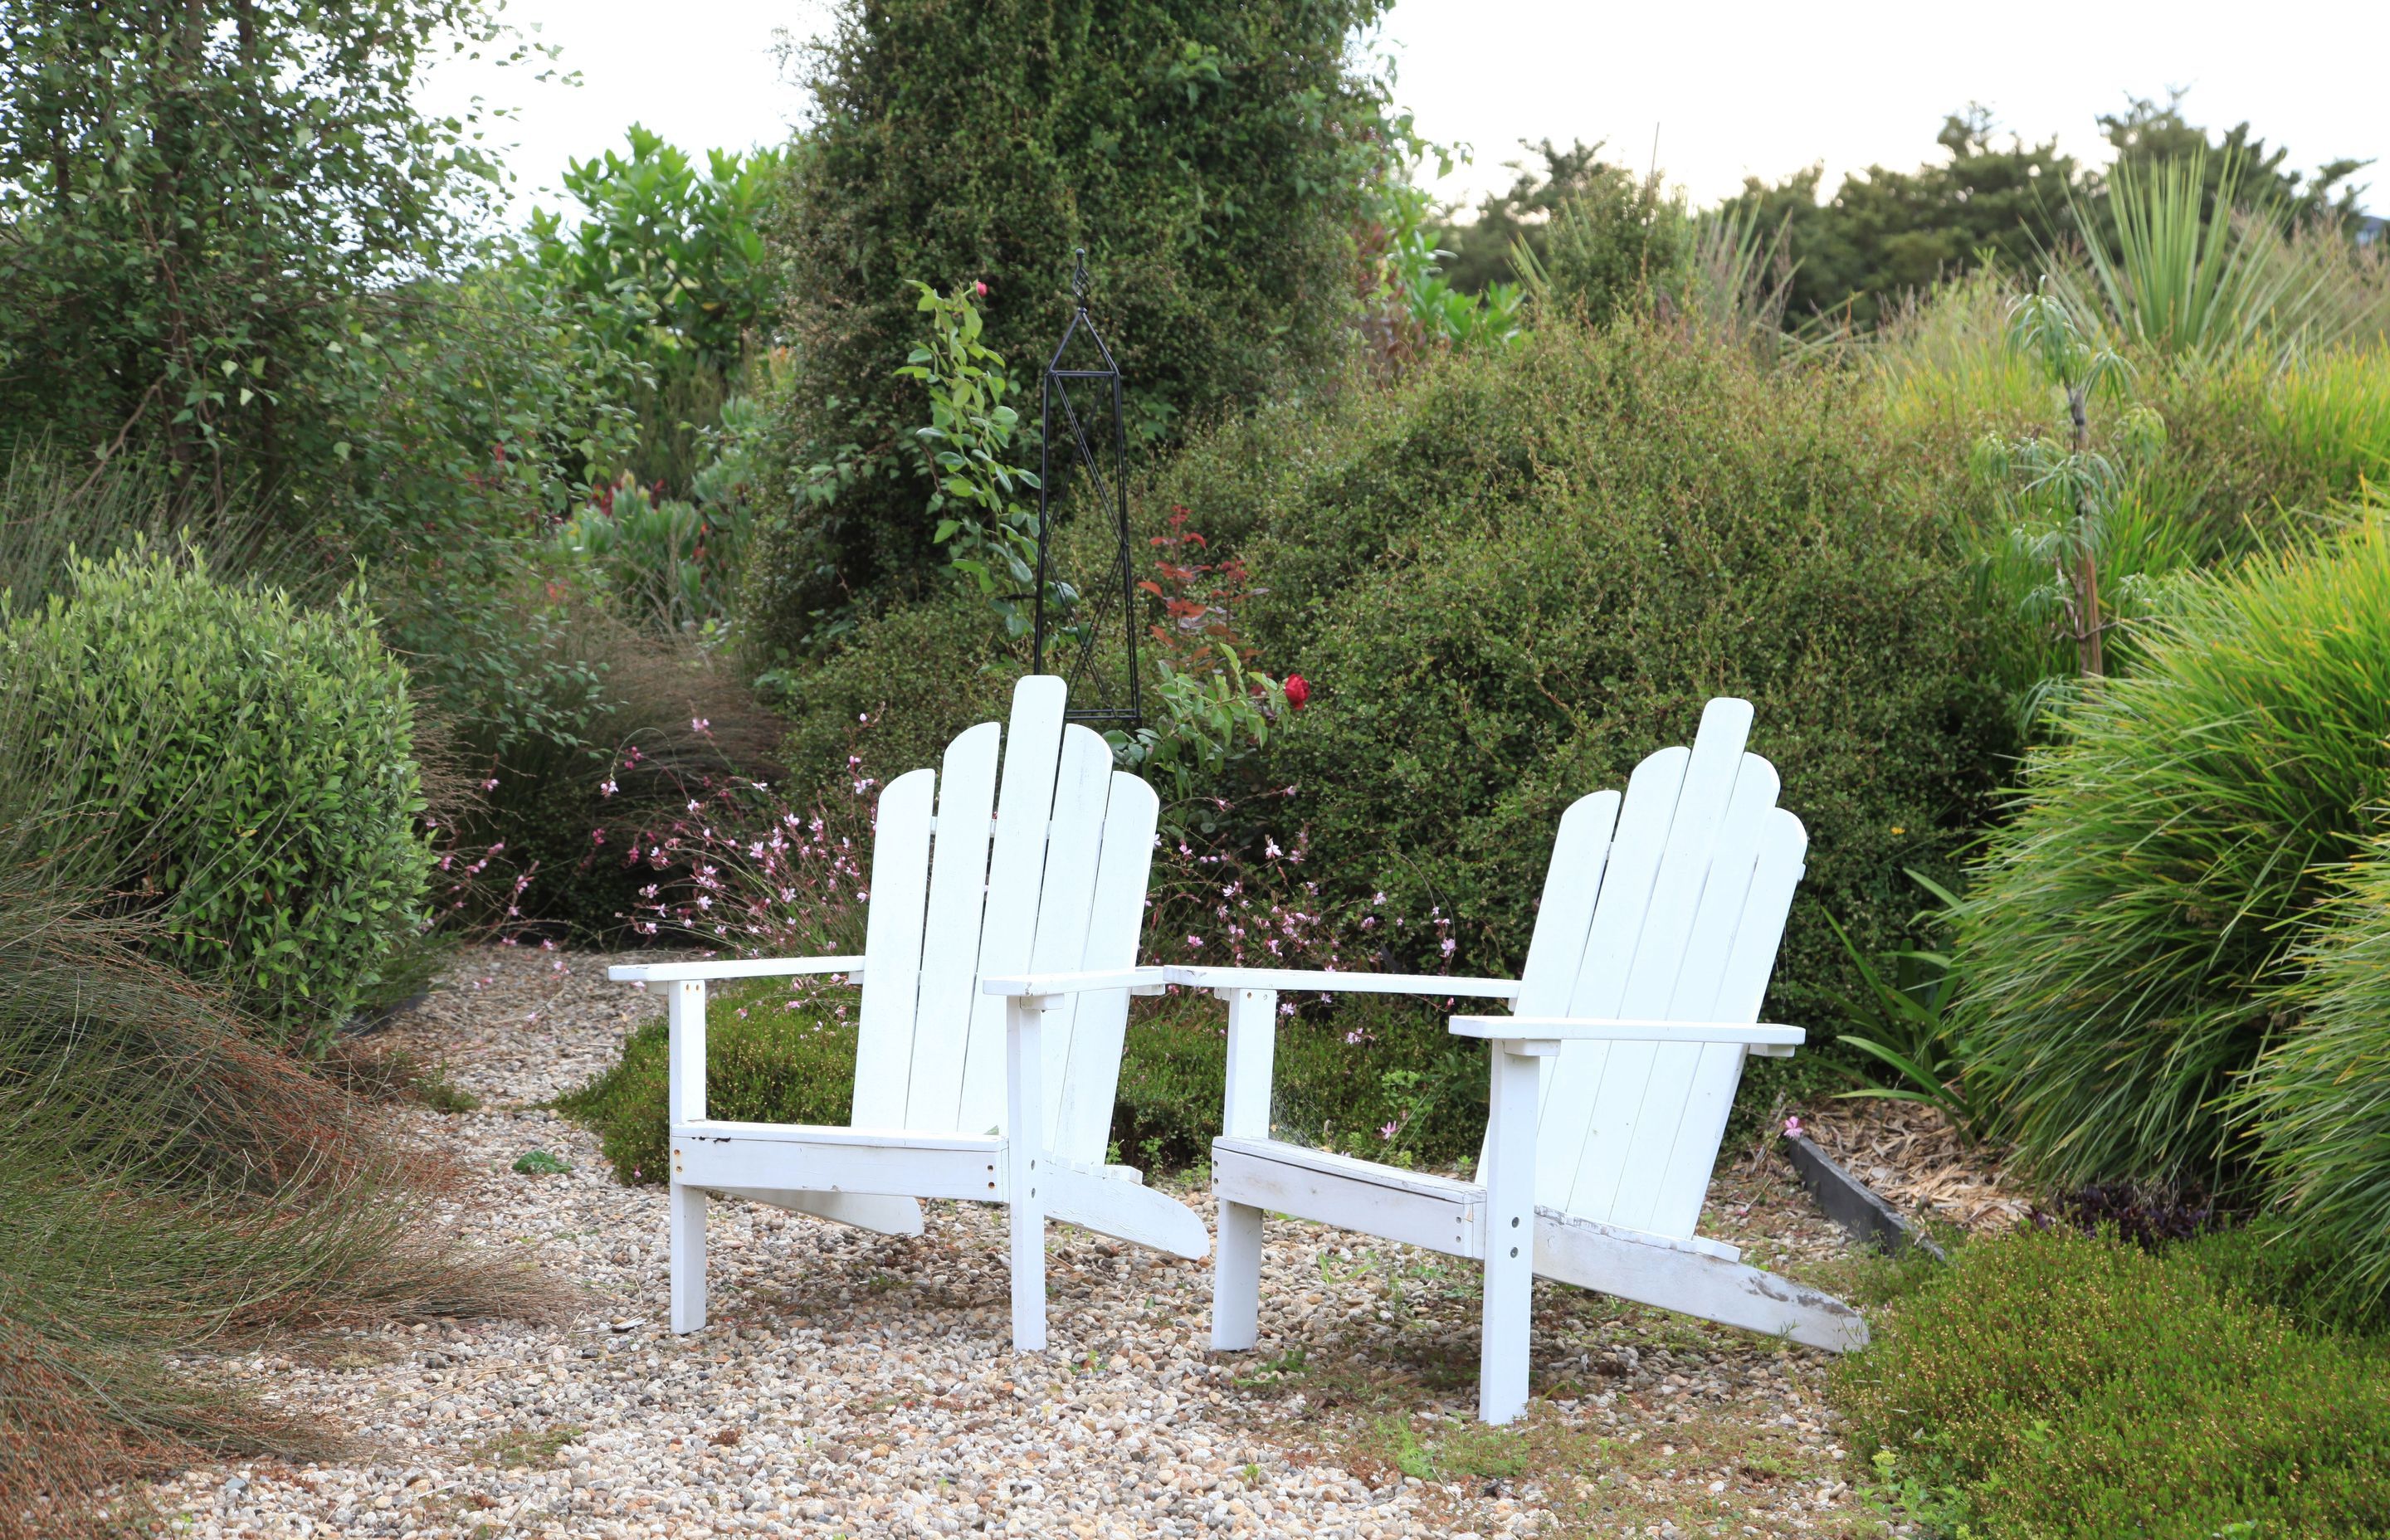 Creating usable entertaining spaces is keey to making the most of your outdoor living - Cape Cod chairs in Resene Double Spanish White